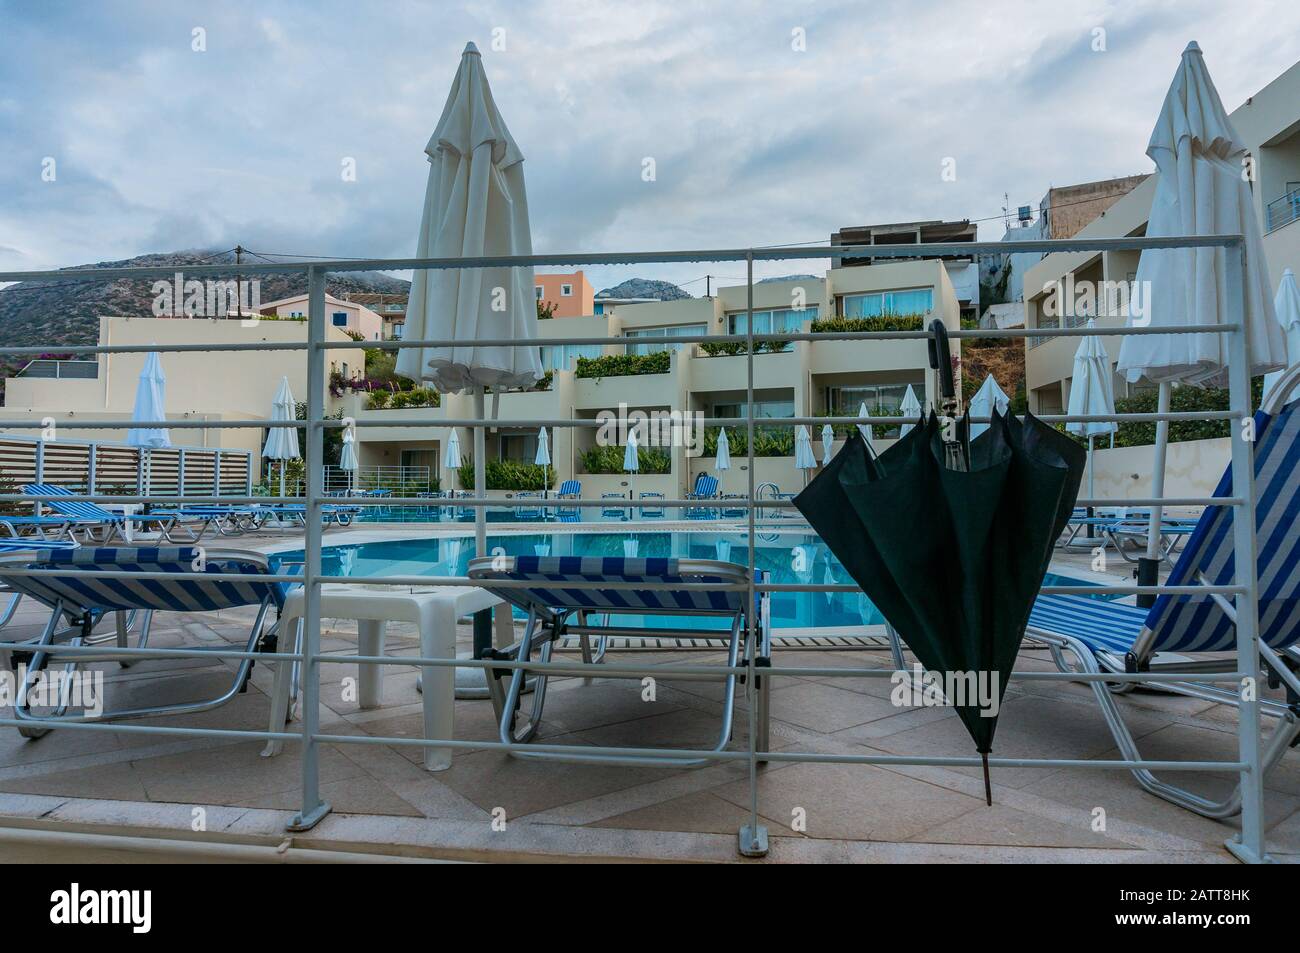 Bali, Crete, Greece - 08.10.2019: after the rain by the pool in the resort. Folded beach umbrellas and a large black umbrella. Stock Photo